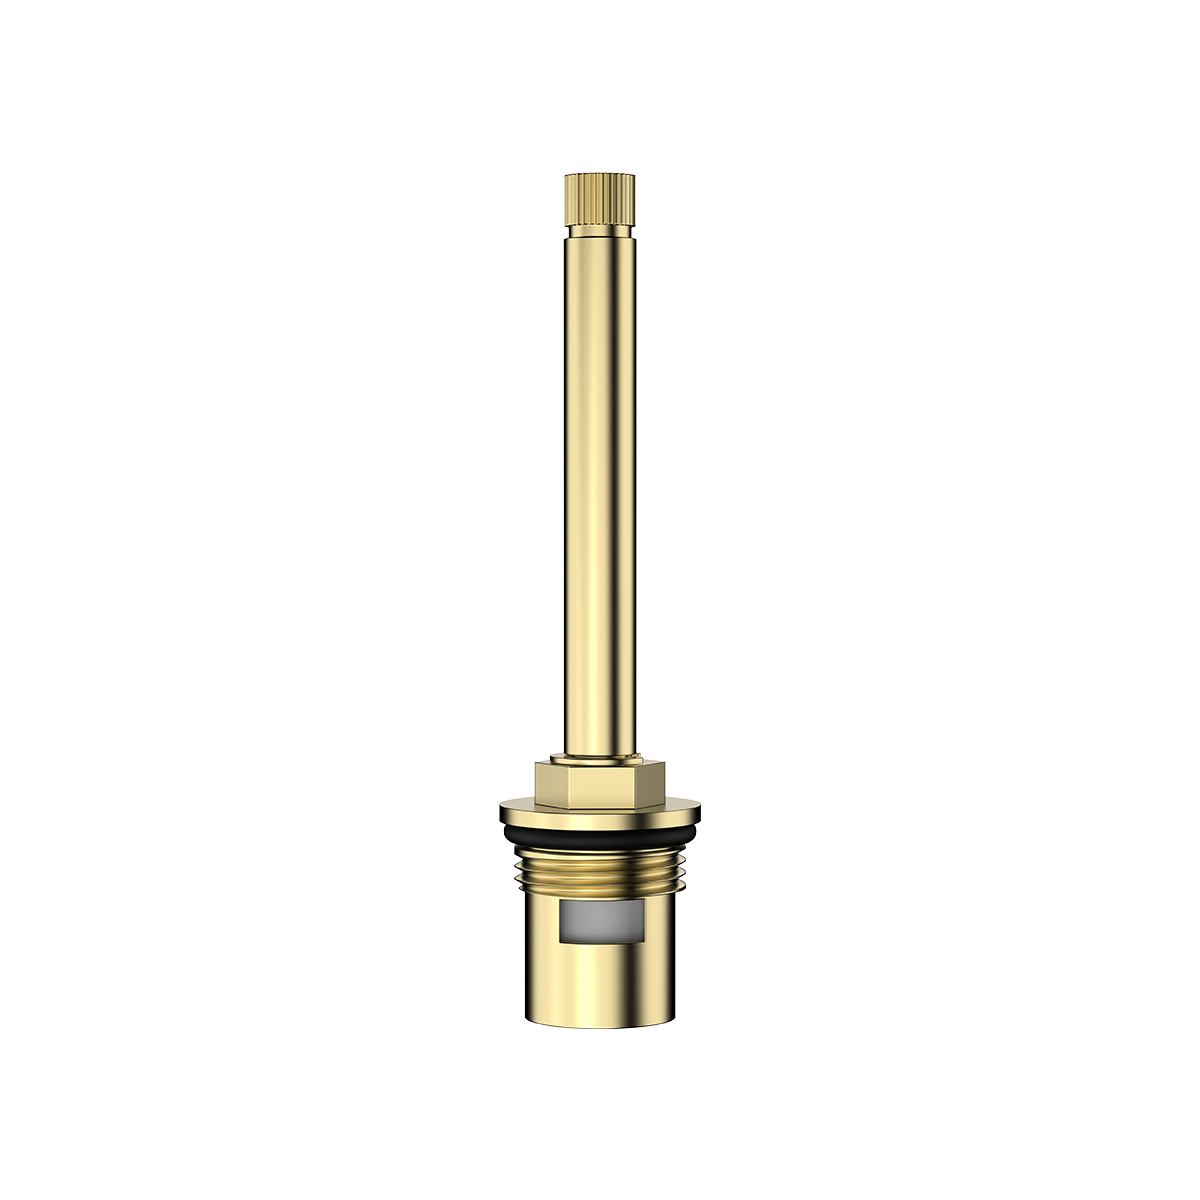 Inner Head-1/2" Long Spindle(For Concealed Stop Cock)